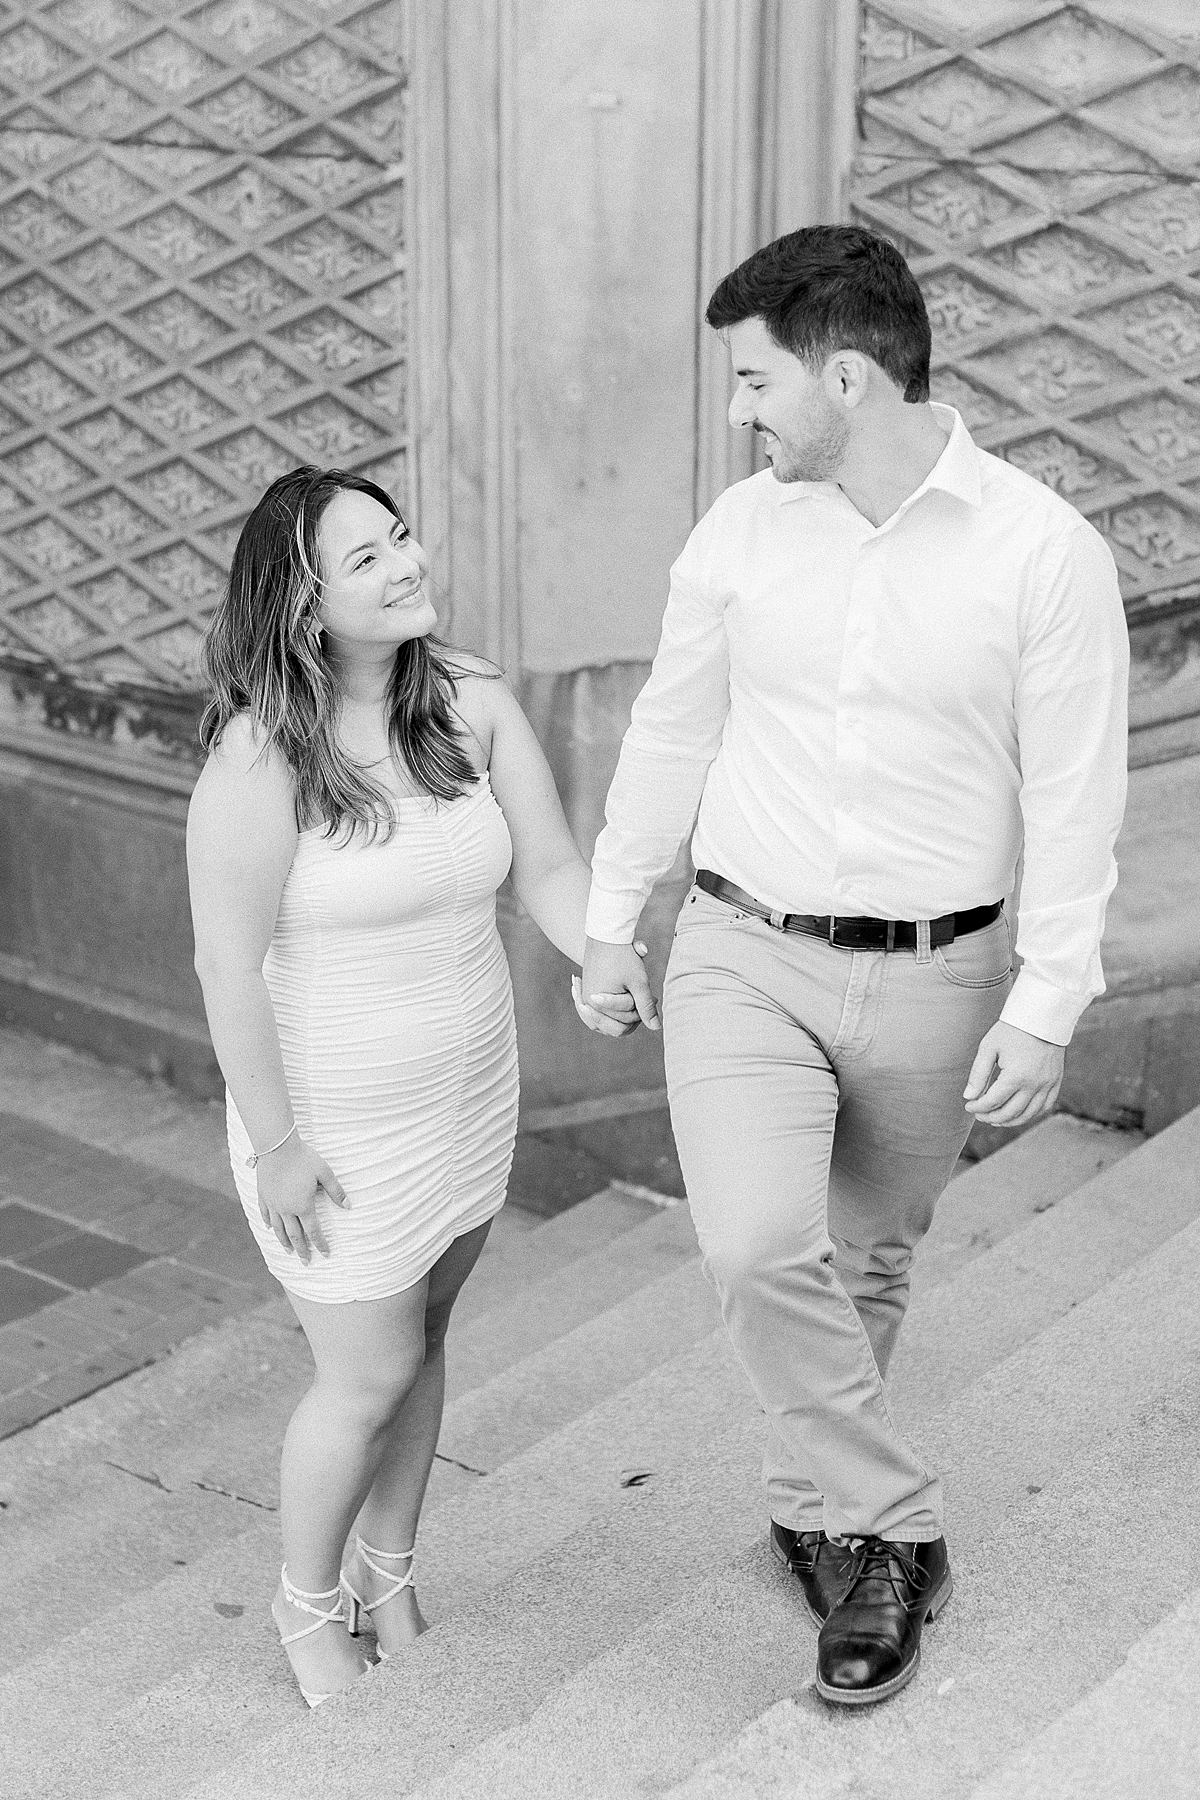 Black and White Engagement Photo on Film by Anna Wright